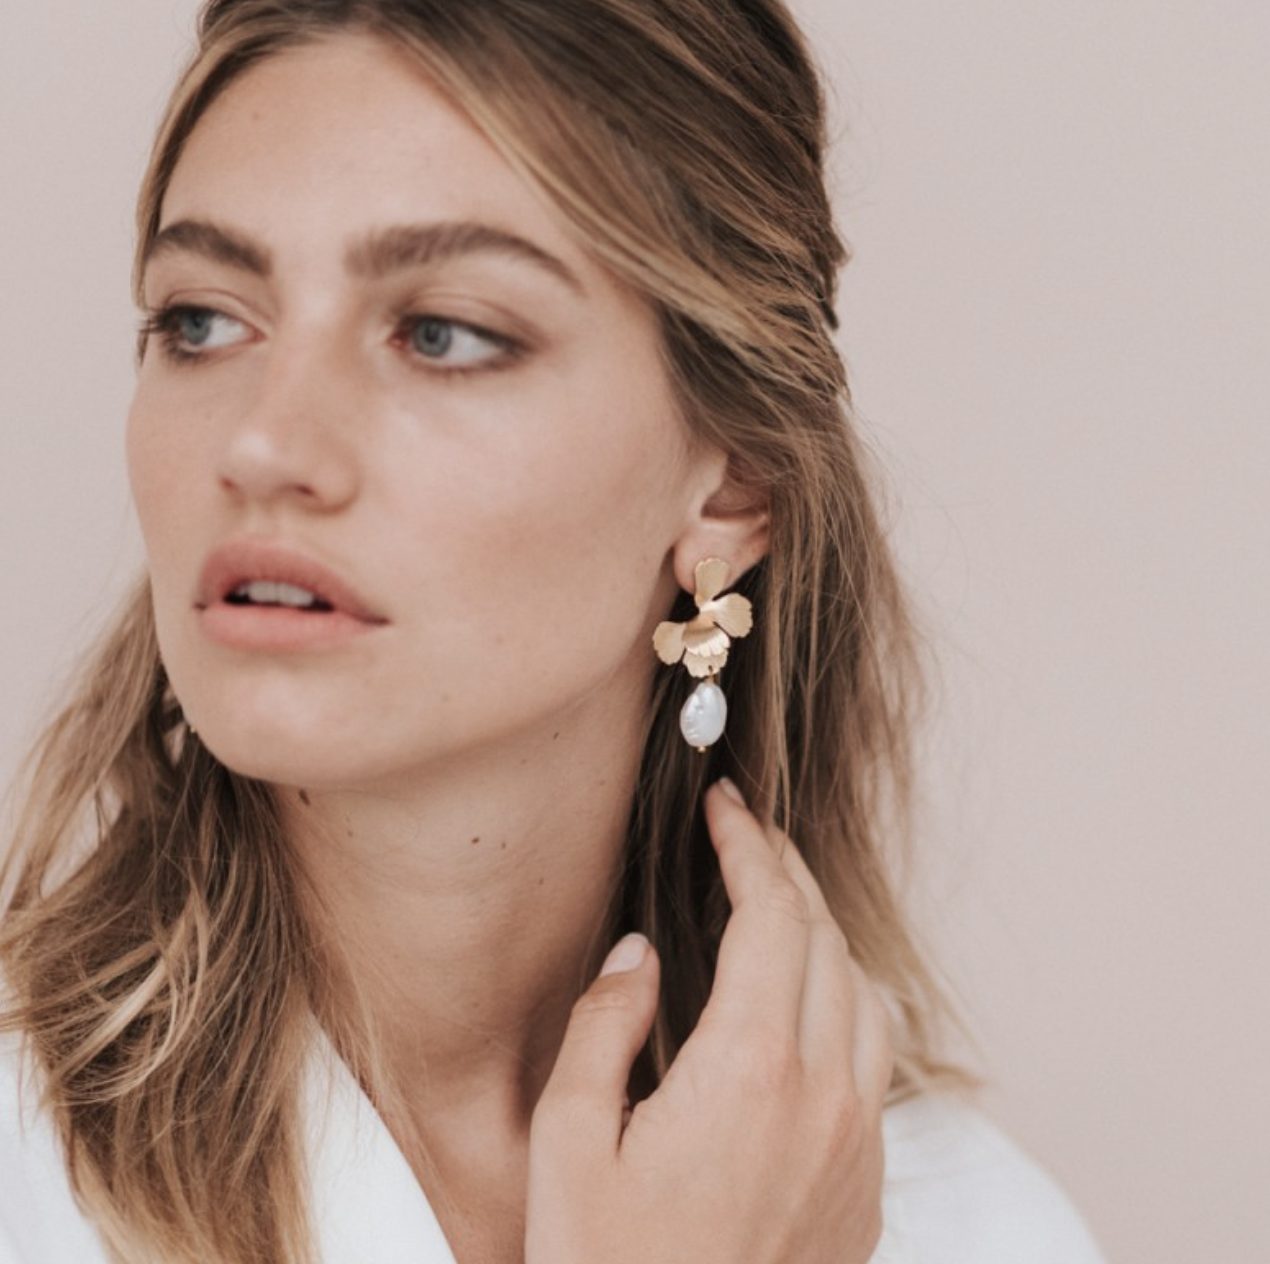 Univers, Gold & Pearl Floral Earrings by Maison Sabben